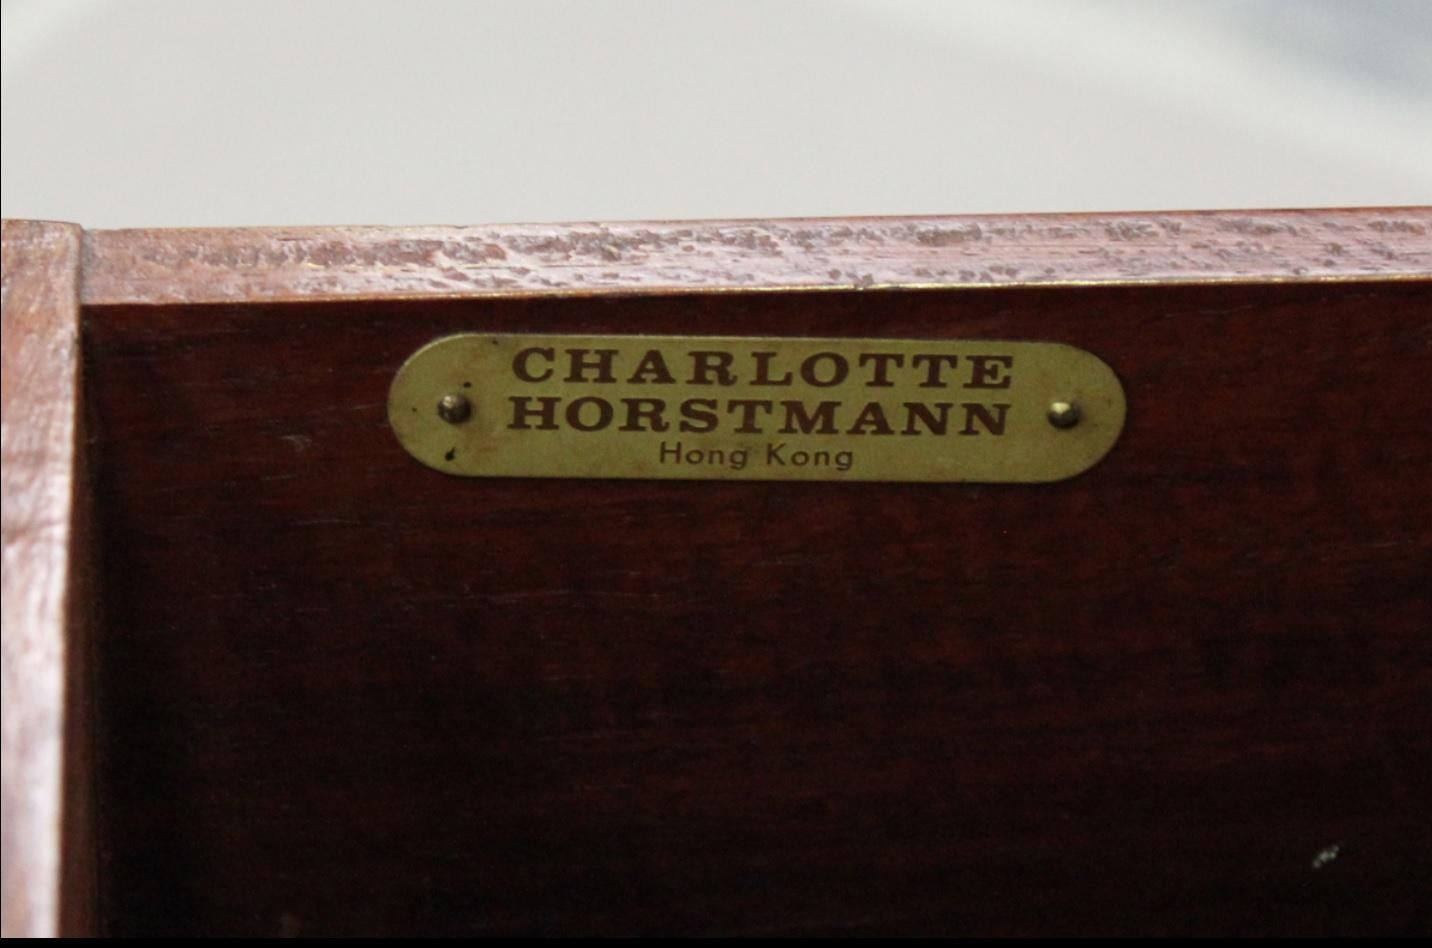 We are delighted to offer for sale this very rare and highly collectable Charlotte Horstmann of Hong Kong mahogany Military campaign chest of drawers / secretaire desk with huge oversize brass handles

A very rare and highly collectable piece from